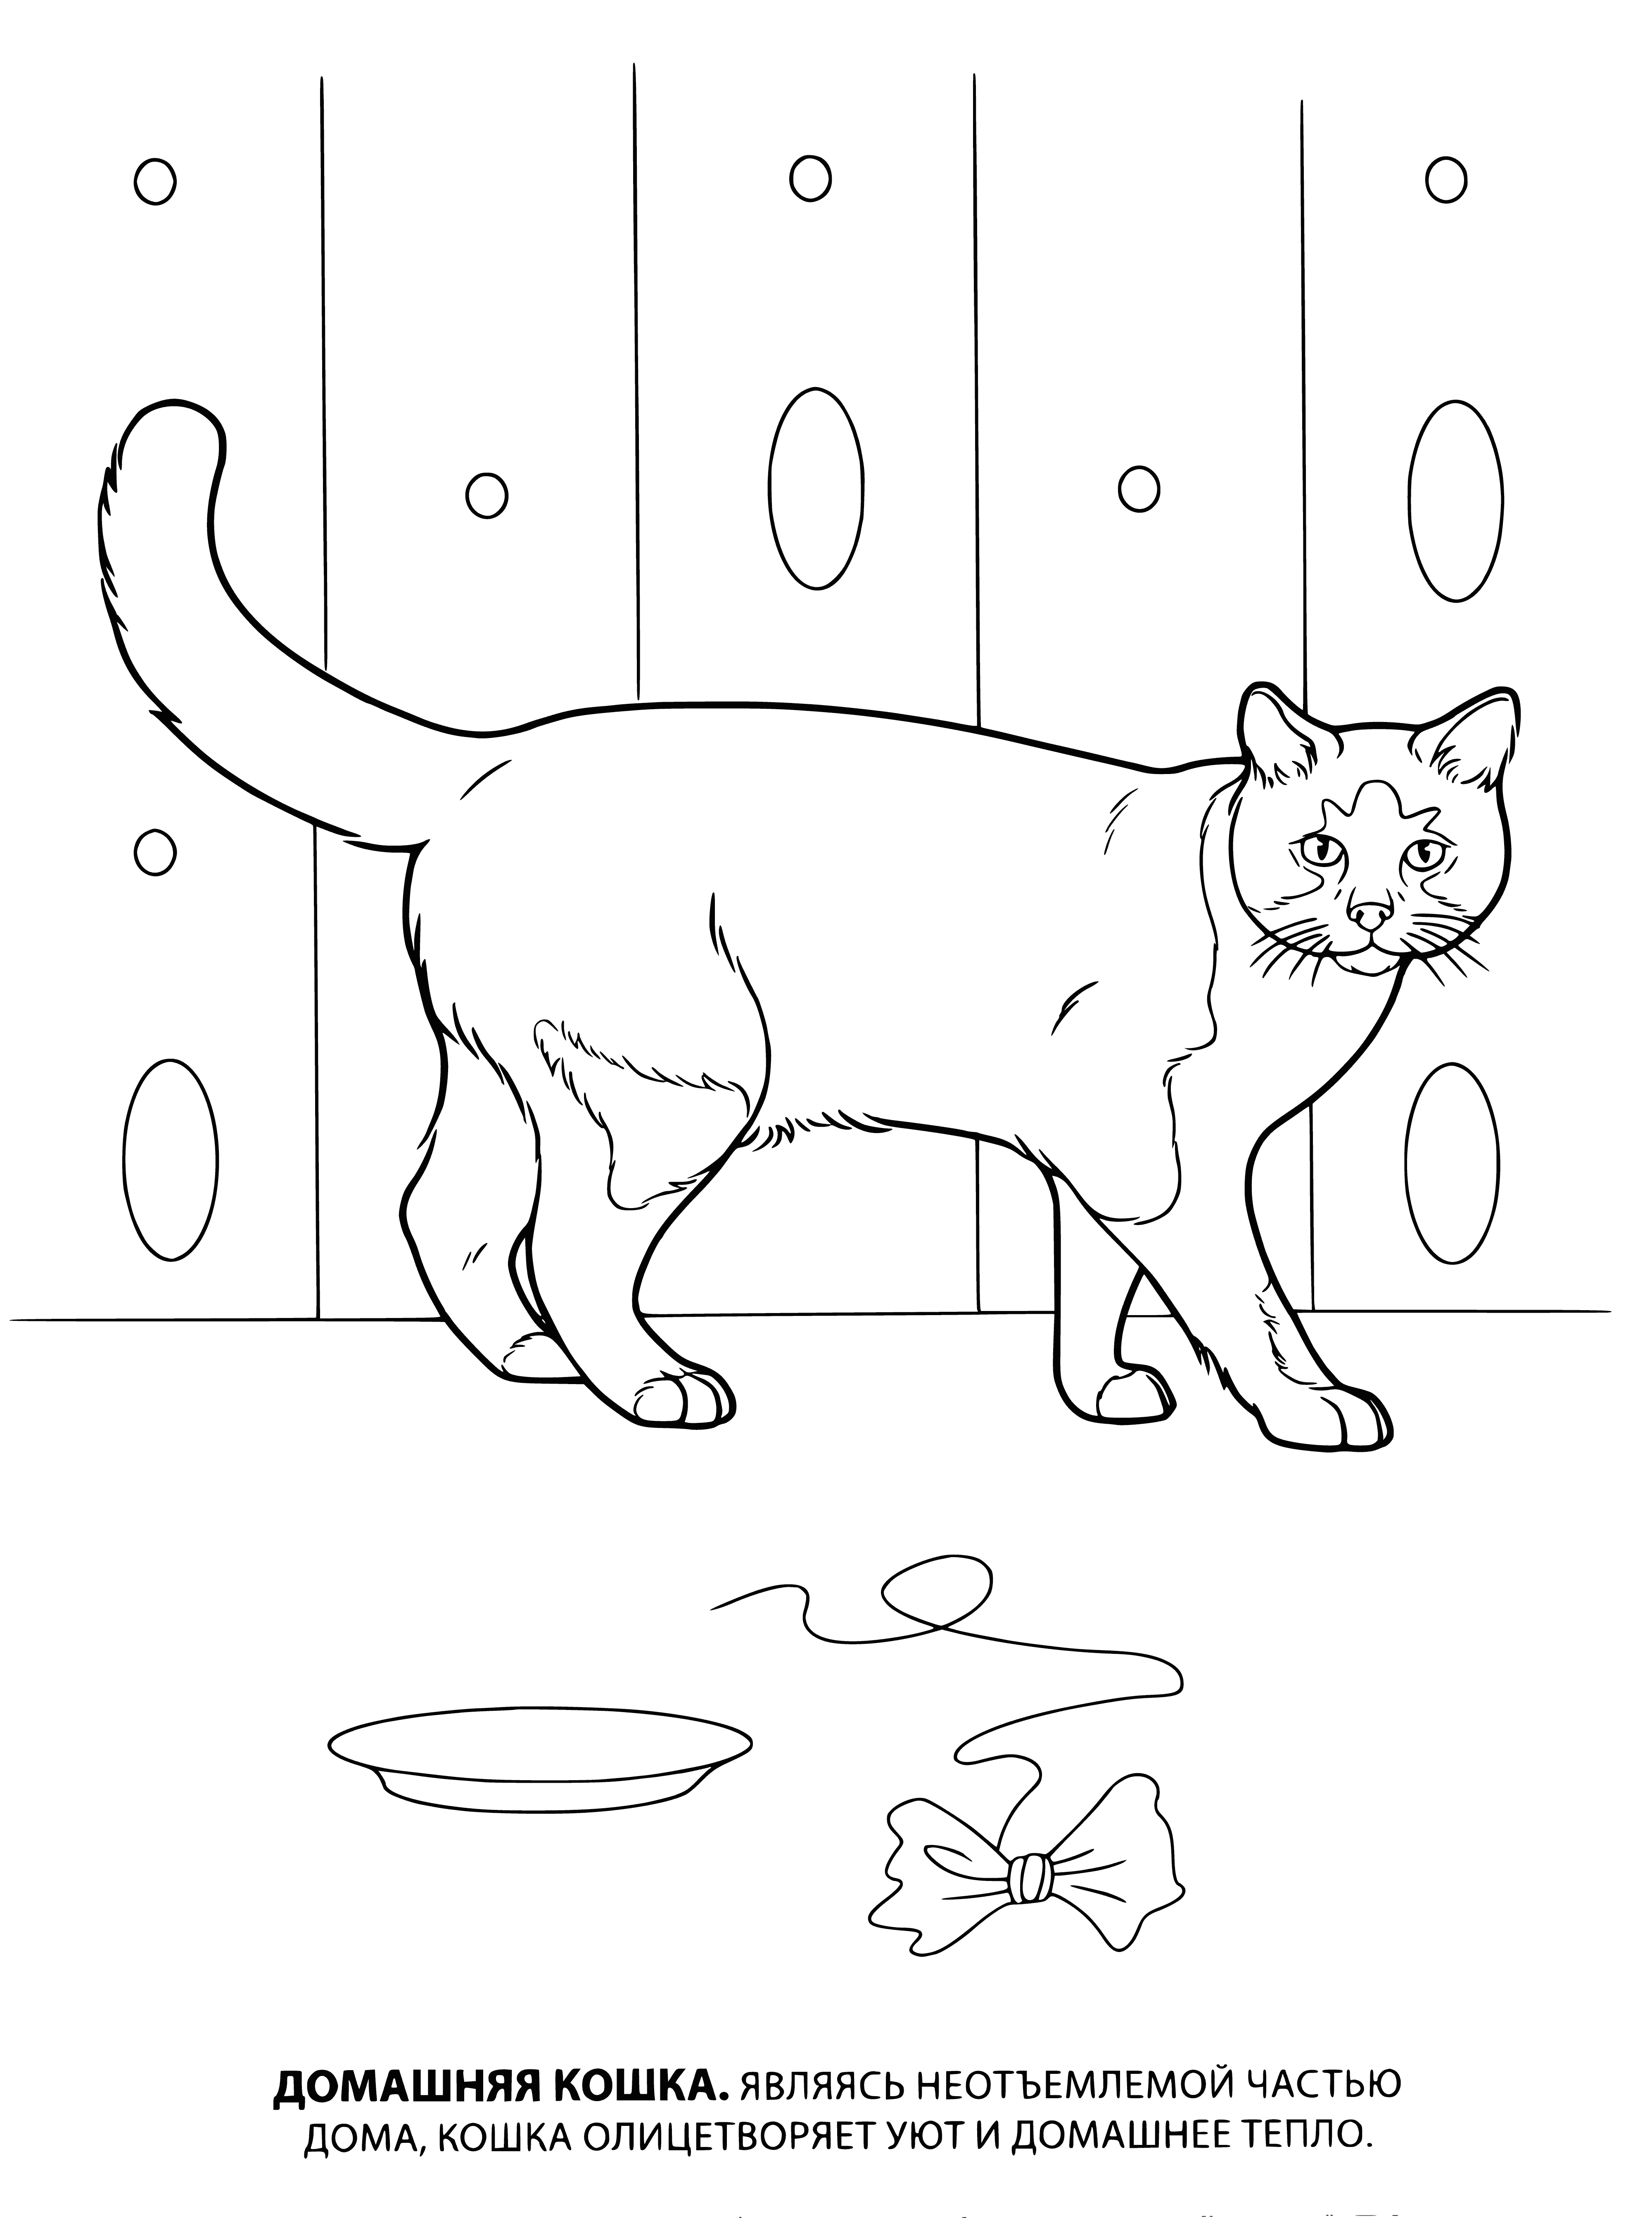 coloring page: Cat: long body/short legs, brown/white fur, long tail, sitting on a chair.